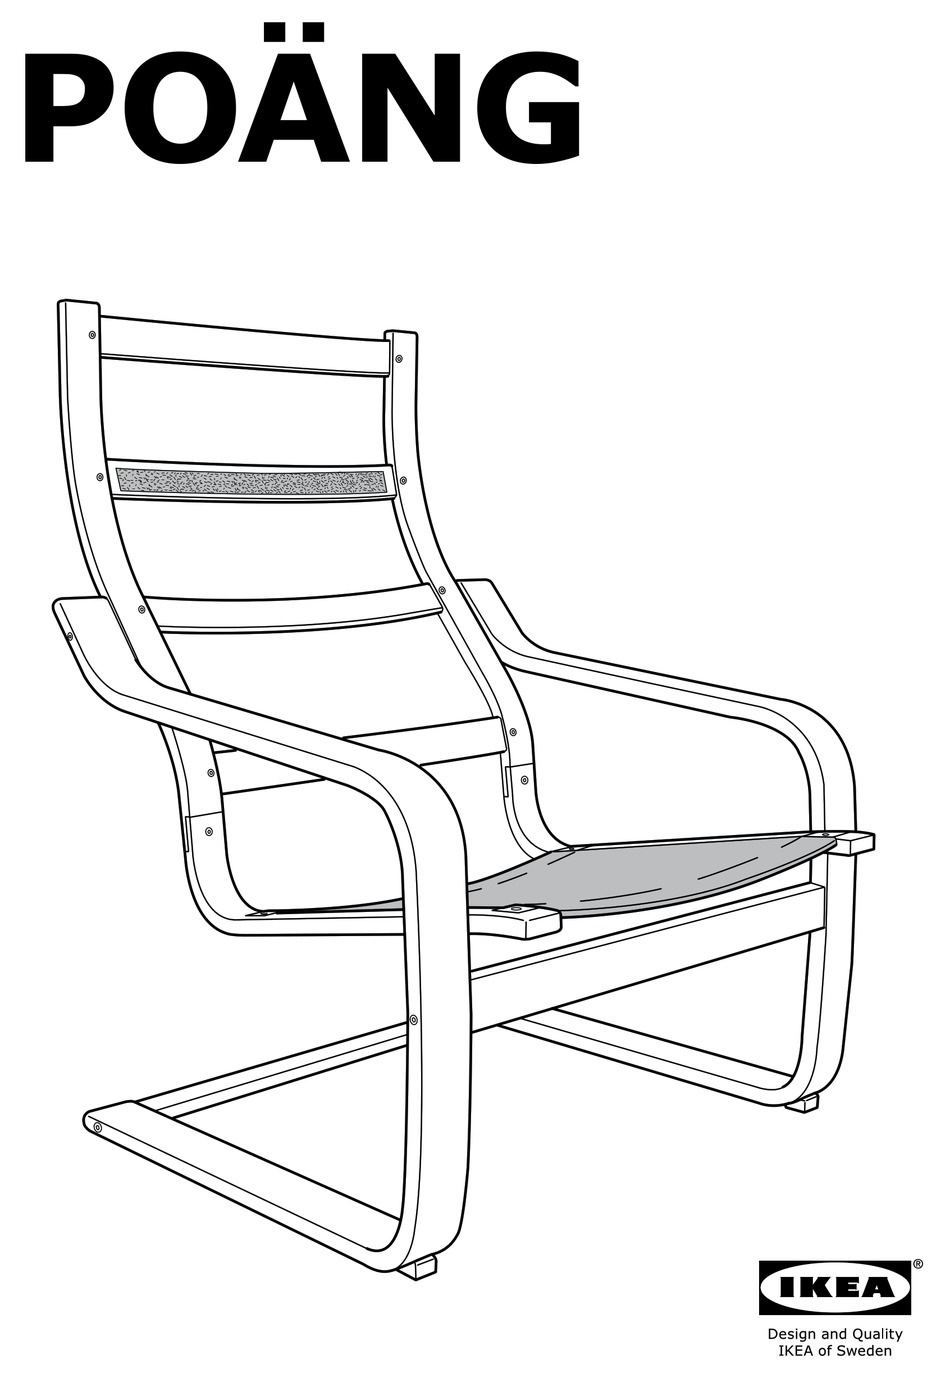 Ikea Poang Chair Assembly Instructions : Ikea Poang Chair Replacement